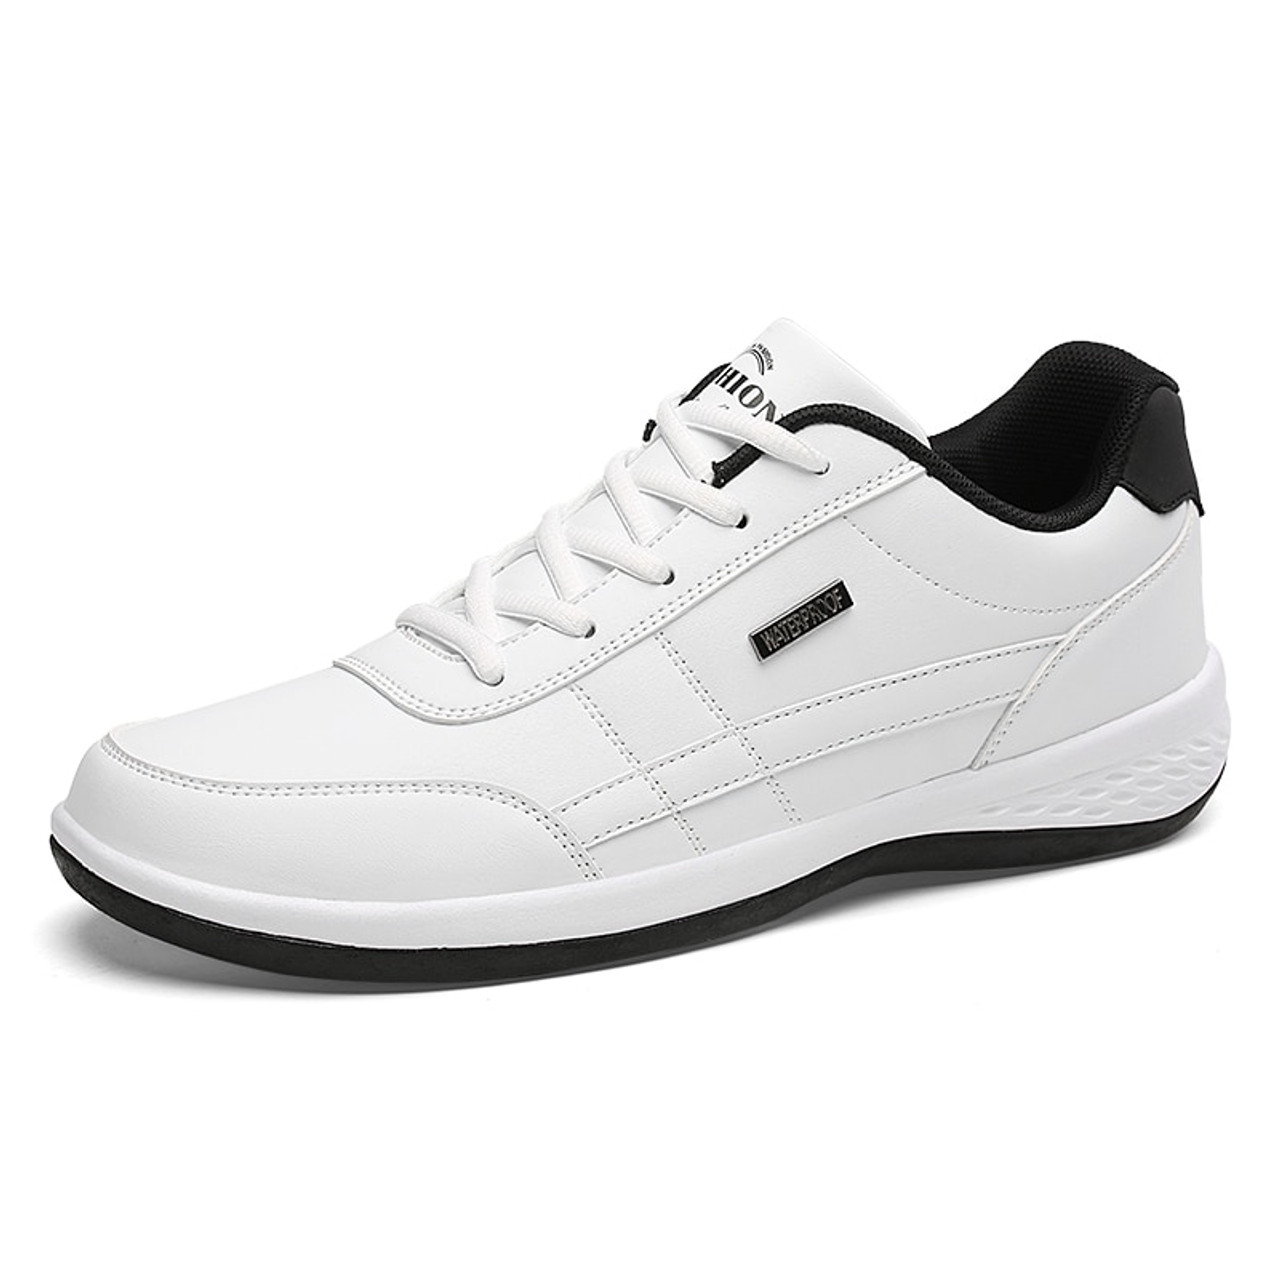 mens leather lace up casual shoes